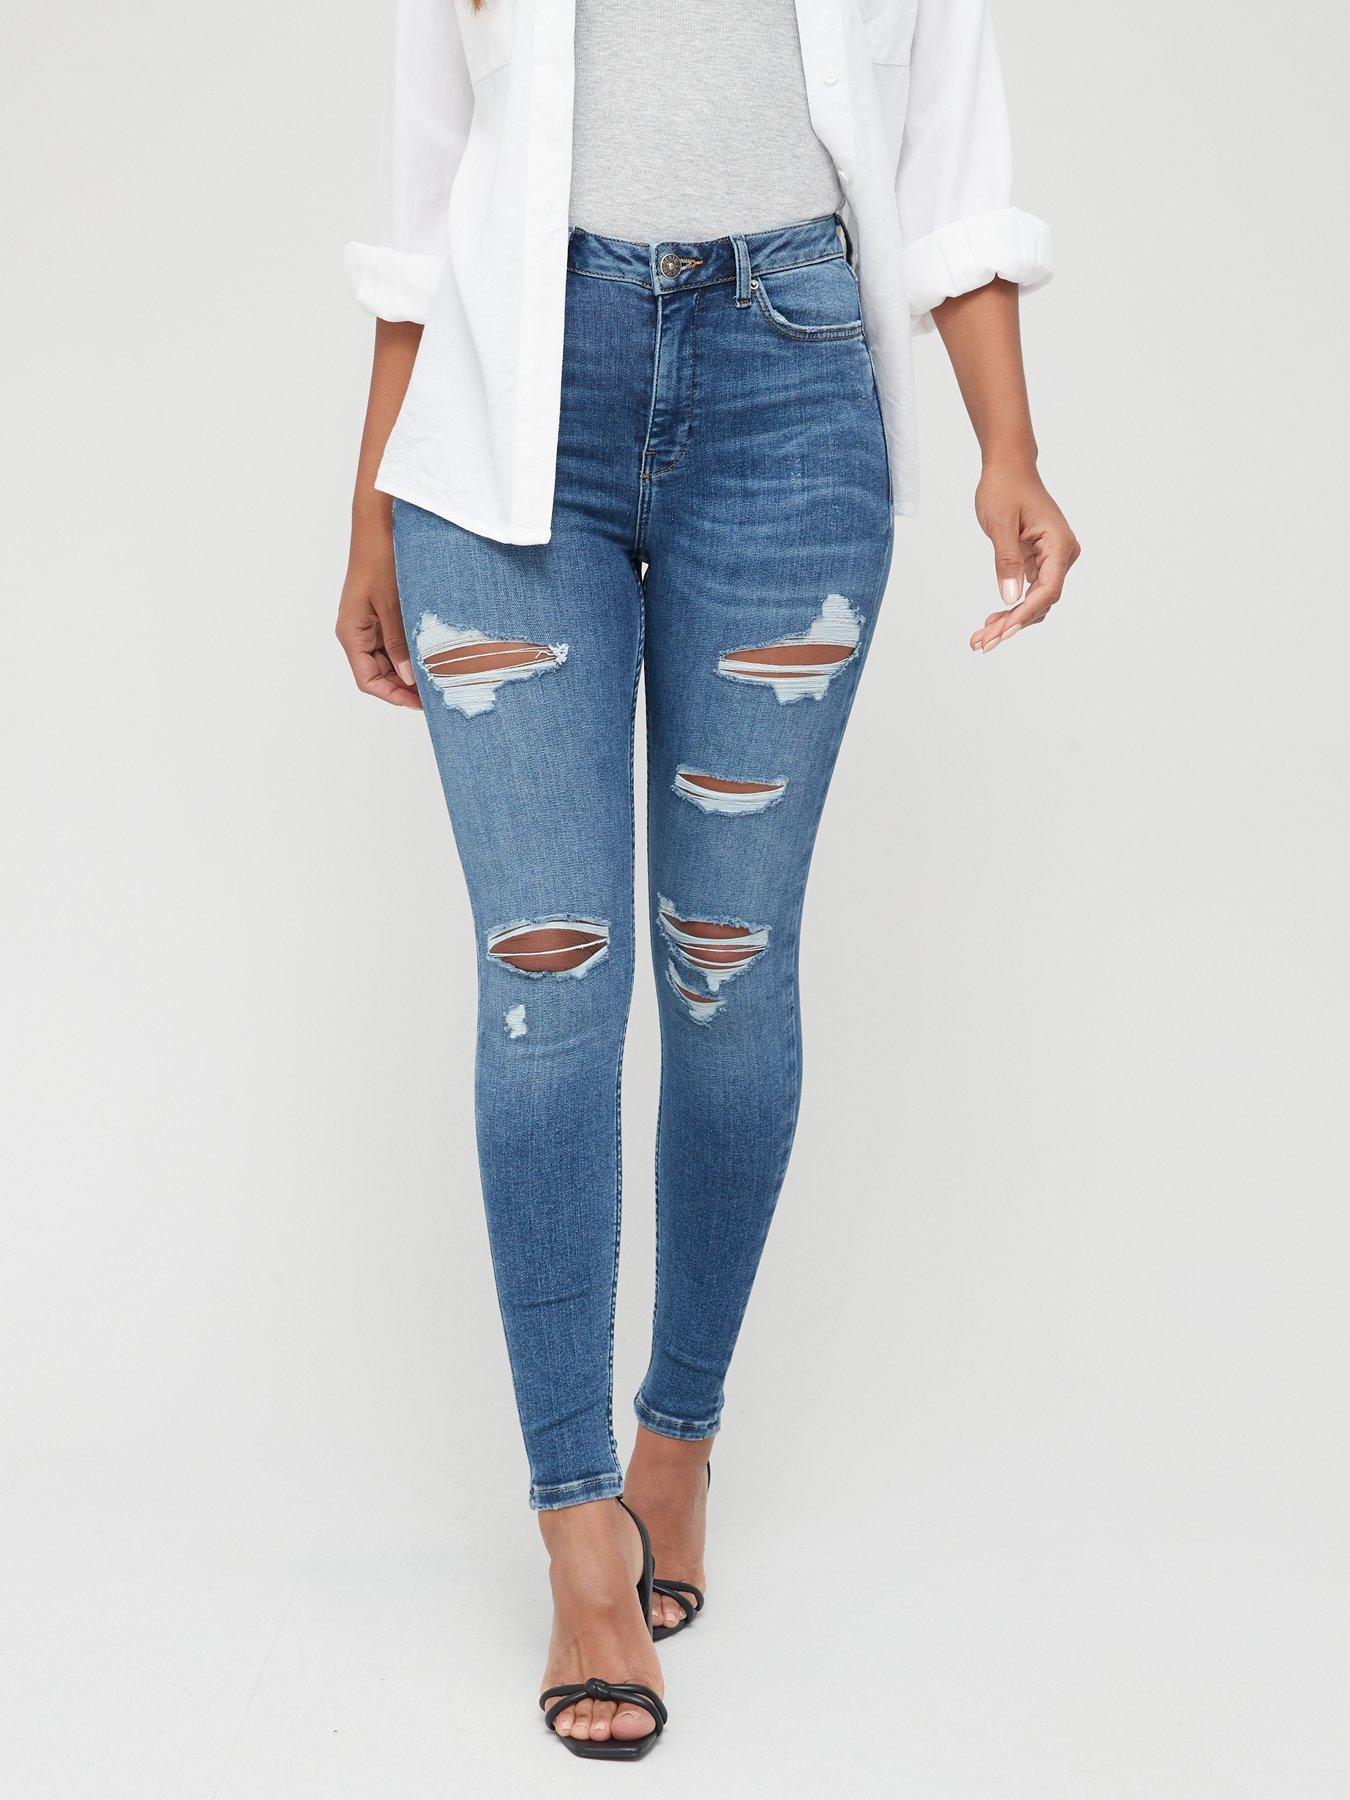 ripped jeans womens front and back